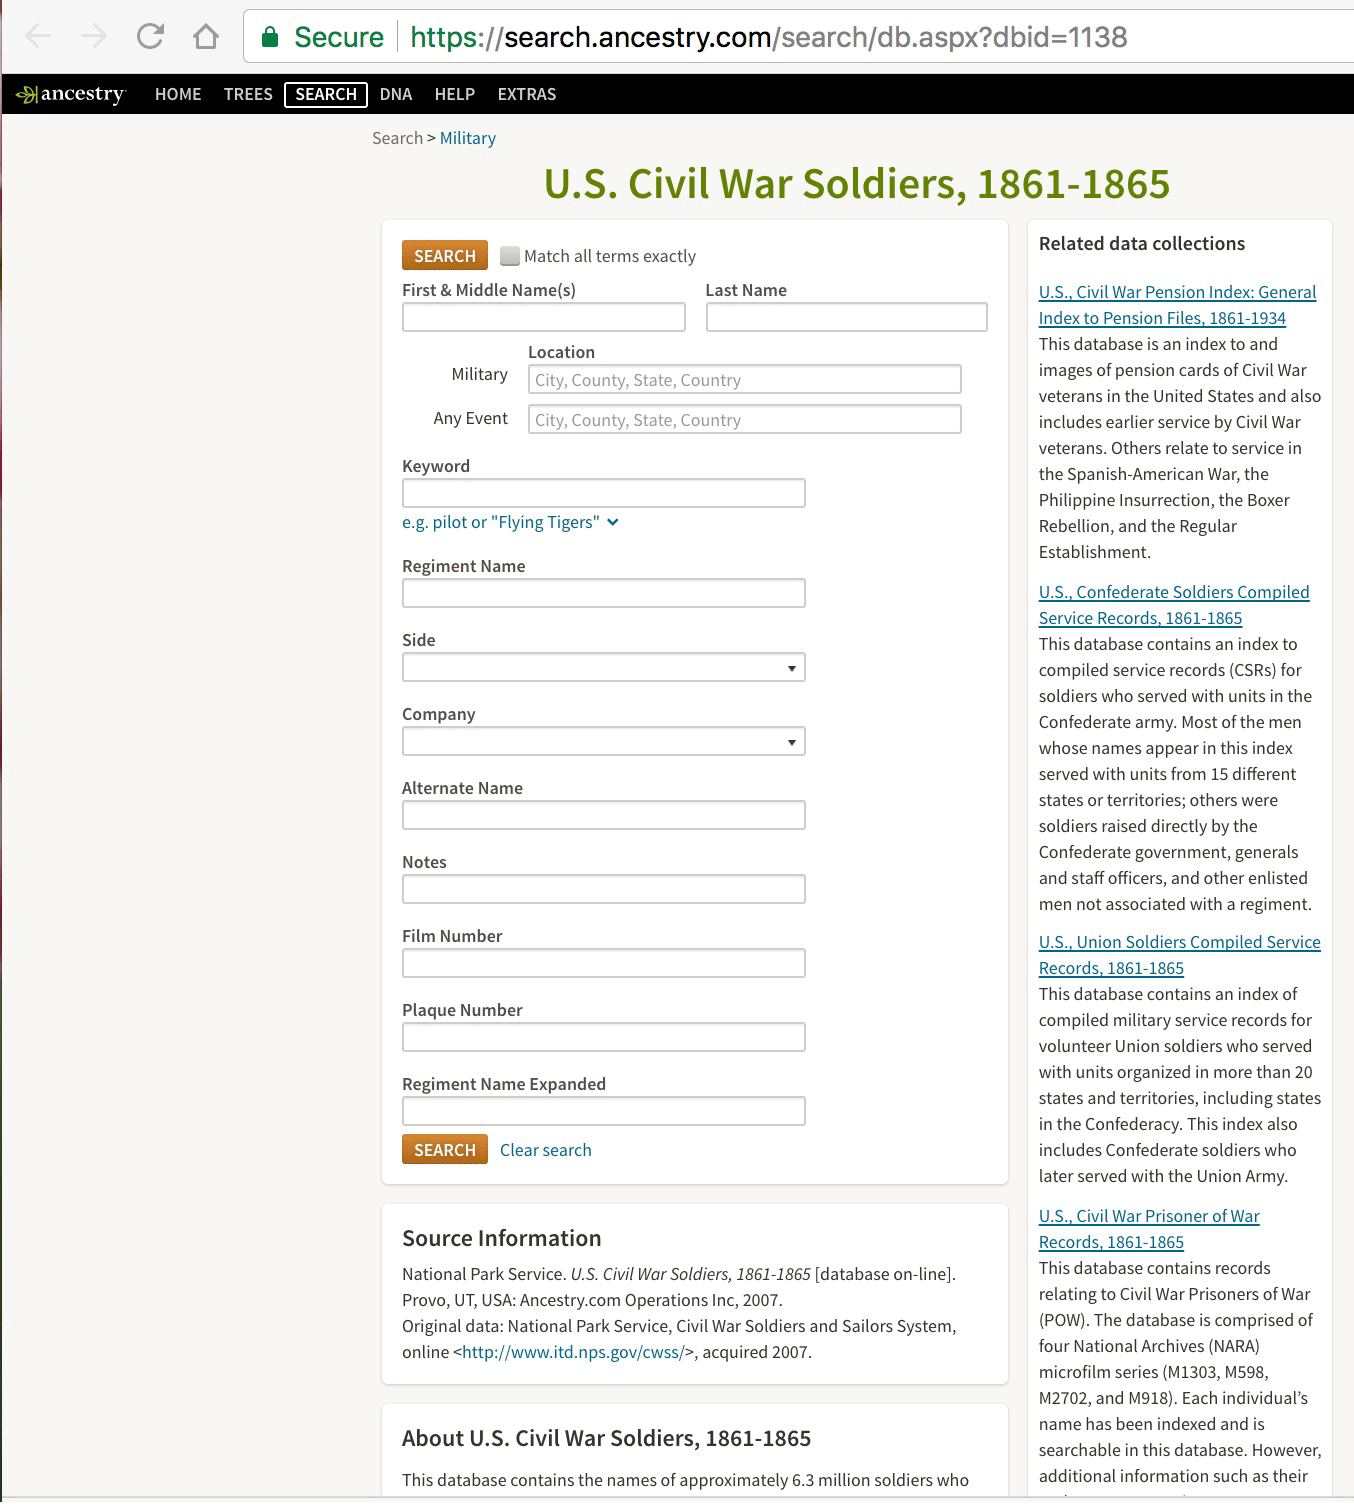 Video: Ancestry.com U.S. Civil War Soldiers Search Example for Soldier William Ballinger